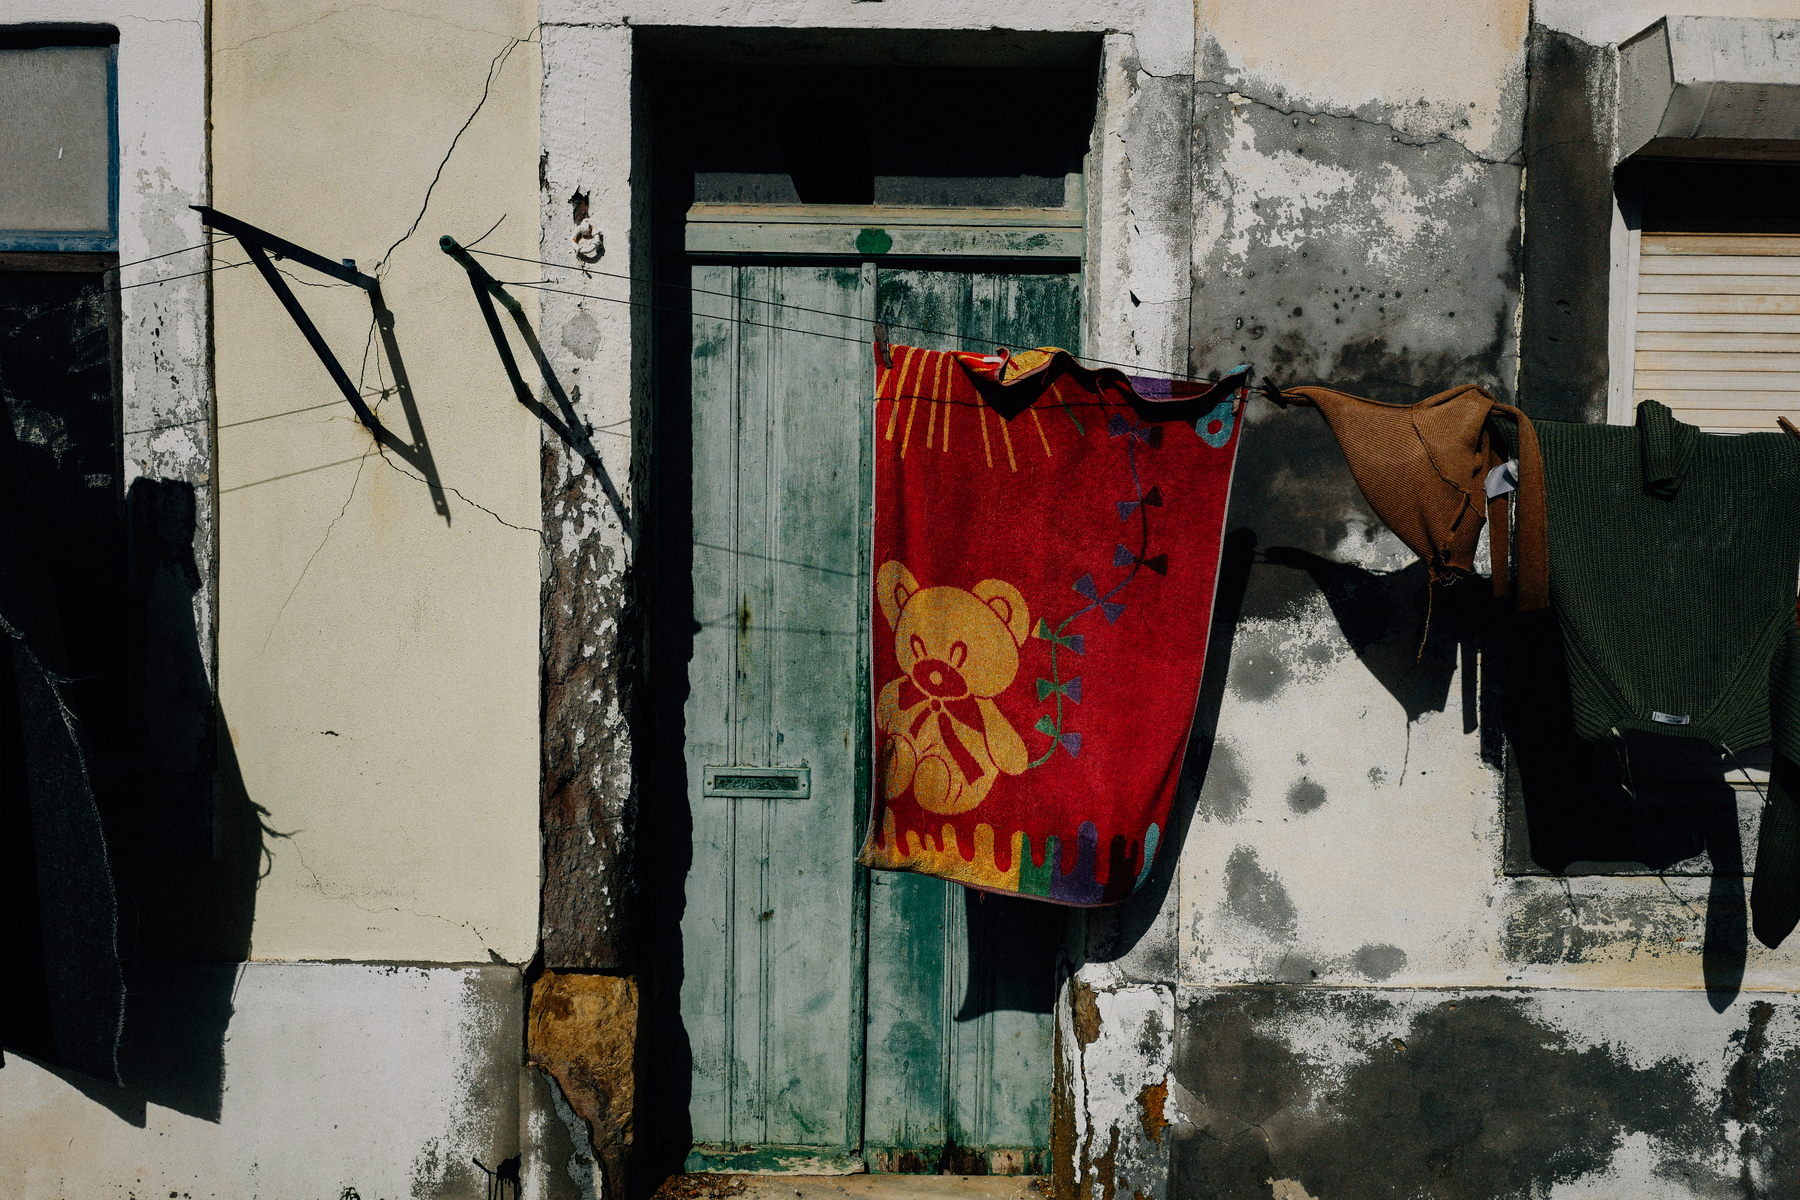 An old weathered wall with a green door, above which hangs a window with broken shutters. Laundry, including a red towel with a teddy bear design and several dark colored clothes, is hung out to dry on a makeshift clothesline.